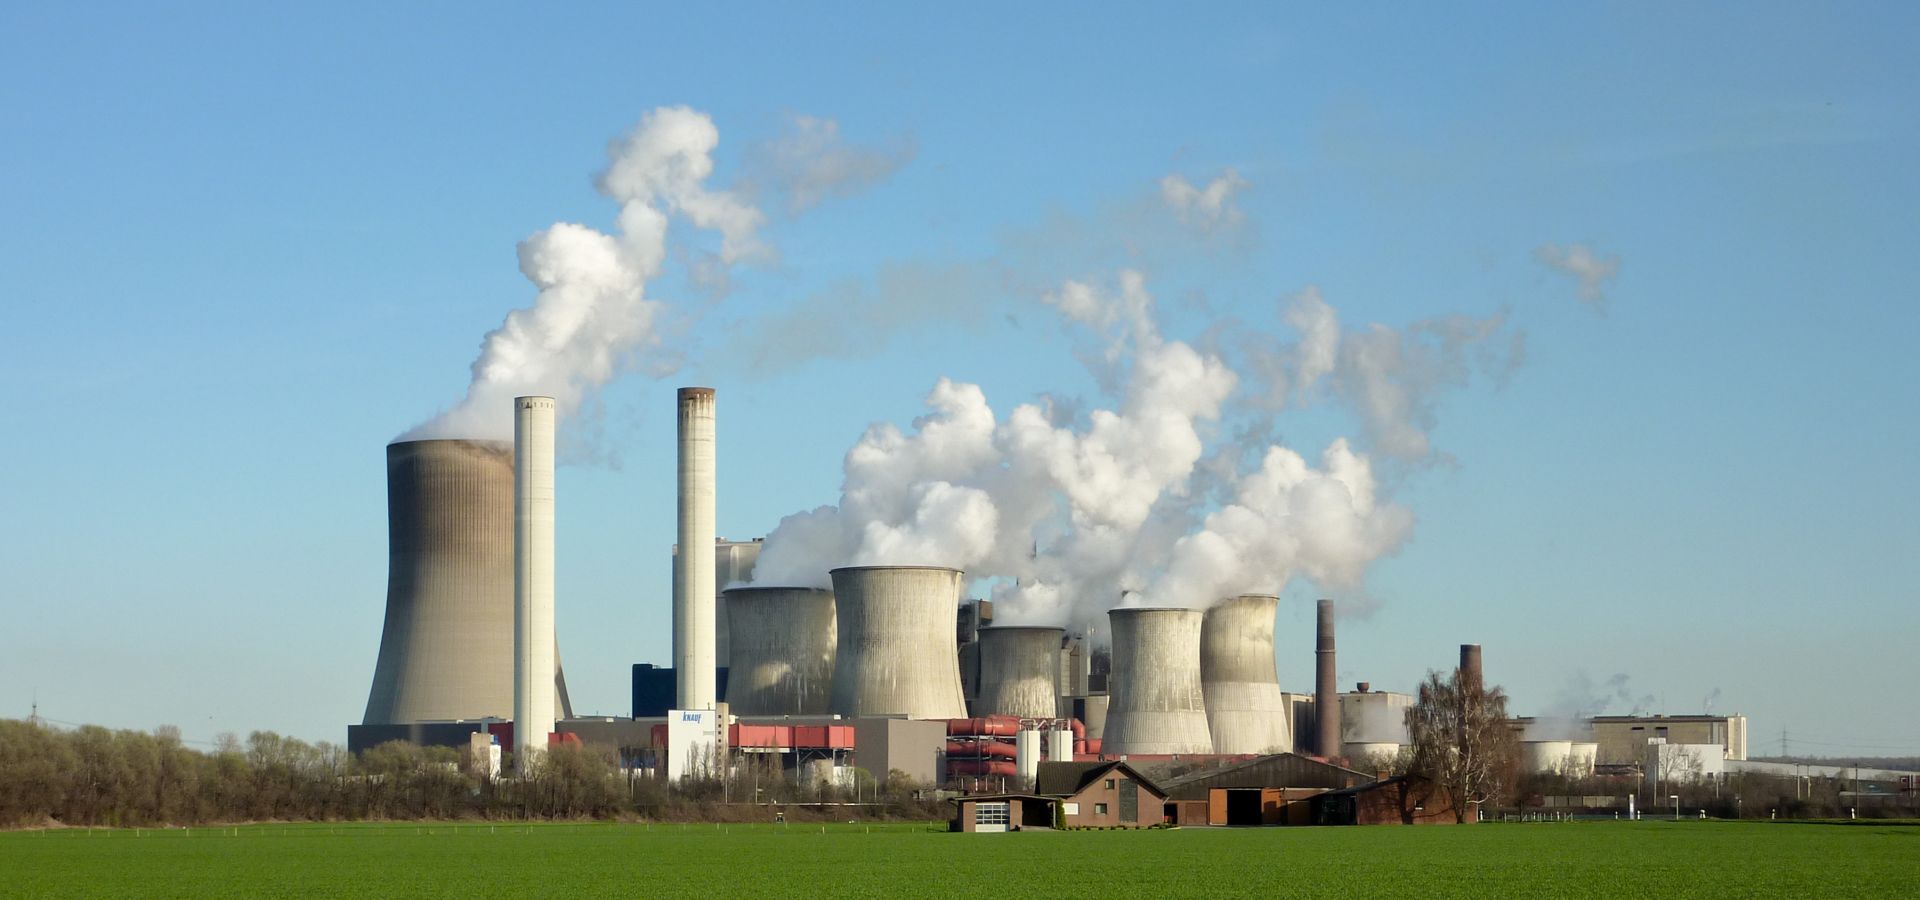 The coal powered plant of Niederaussem in Germany on a sunny day